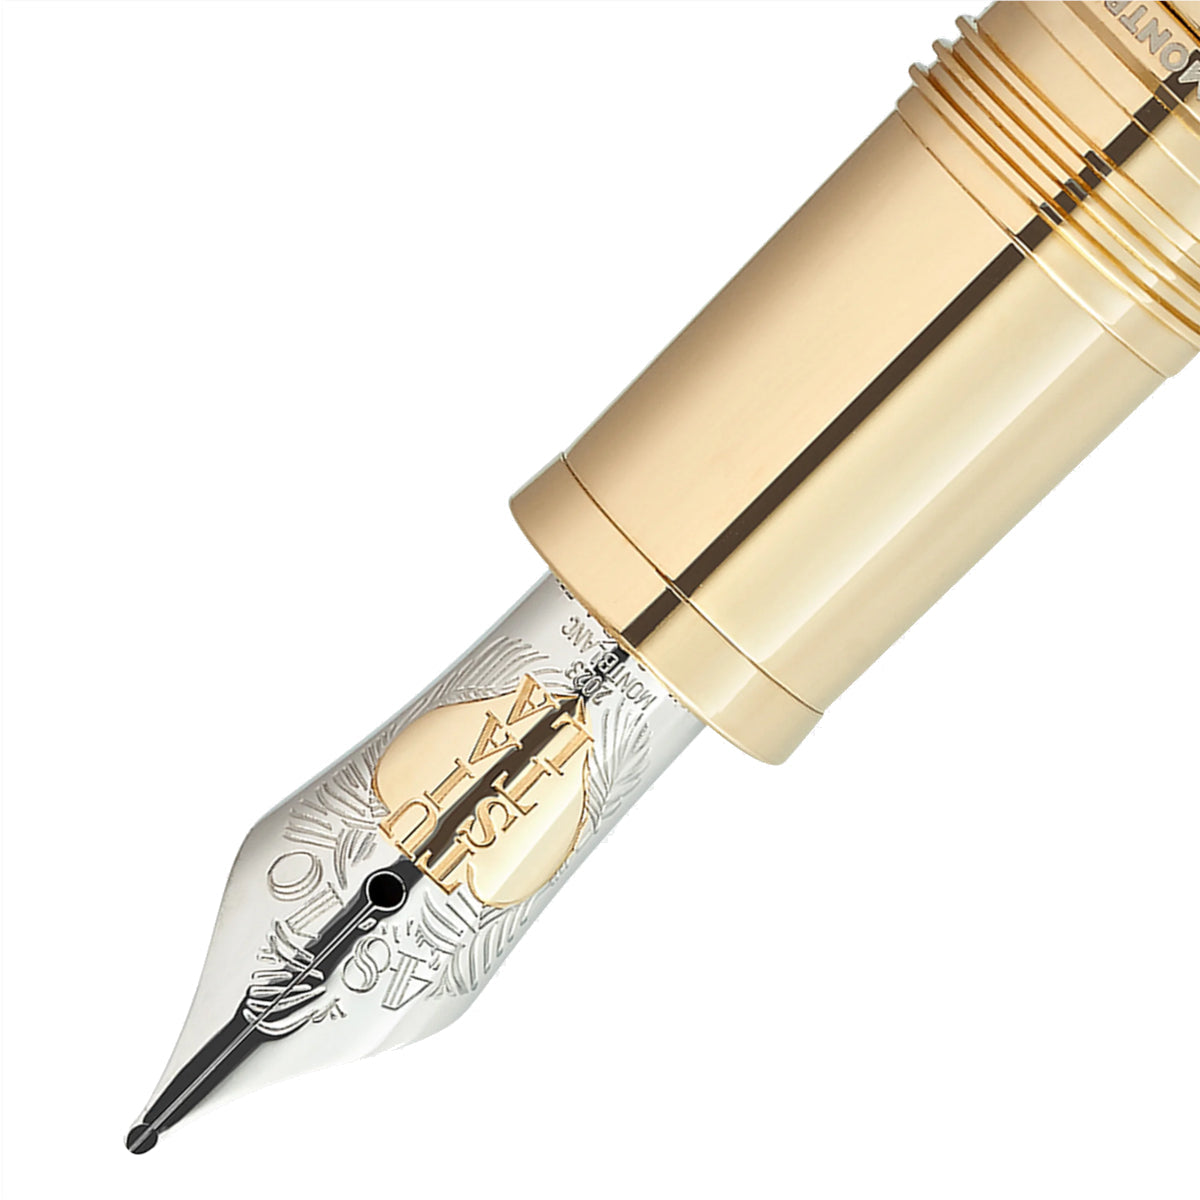 Stylo plume Writers Edition Hommage à Robert Louis Stevenson Limited Edition 94